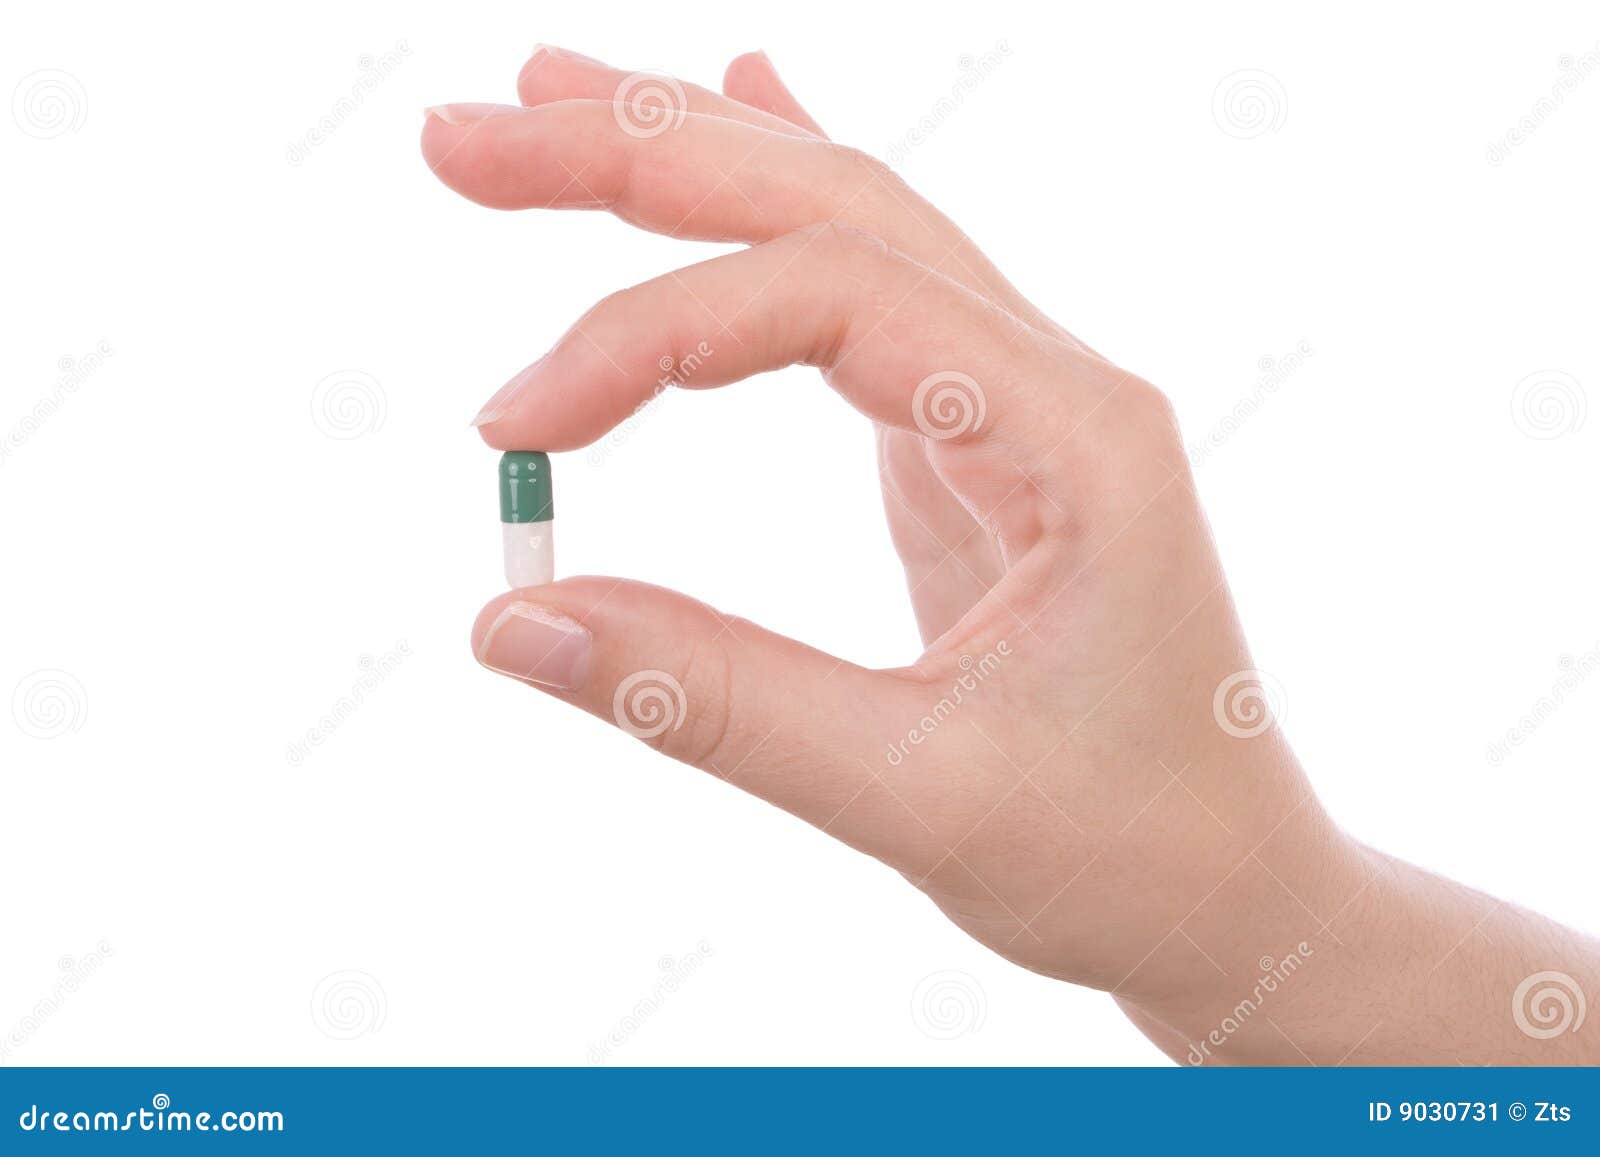 hand holding a capsule or pill